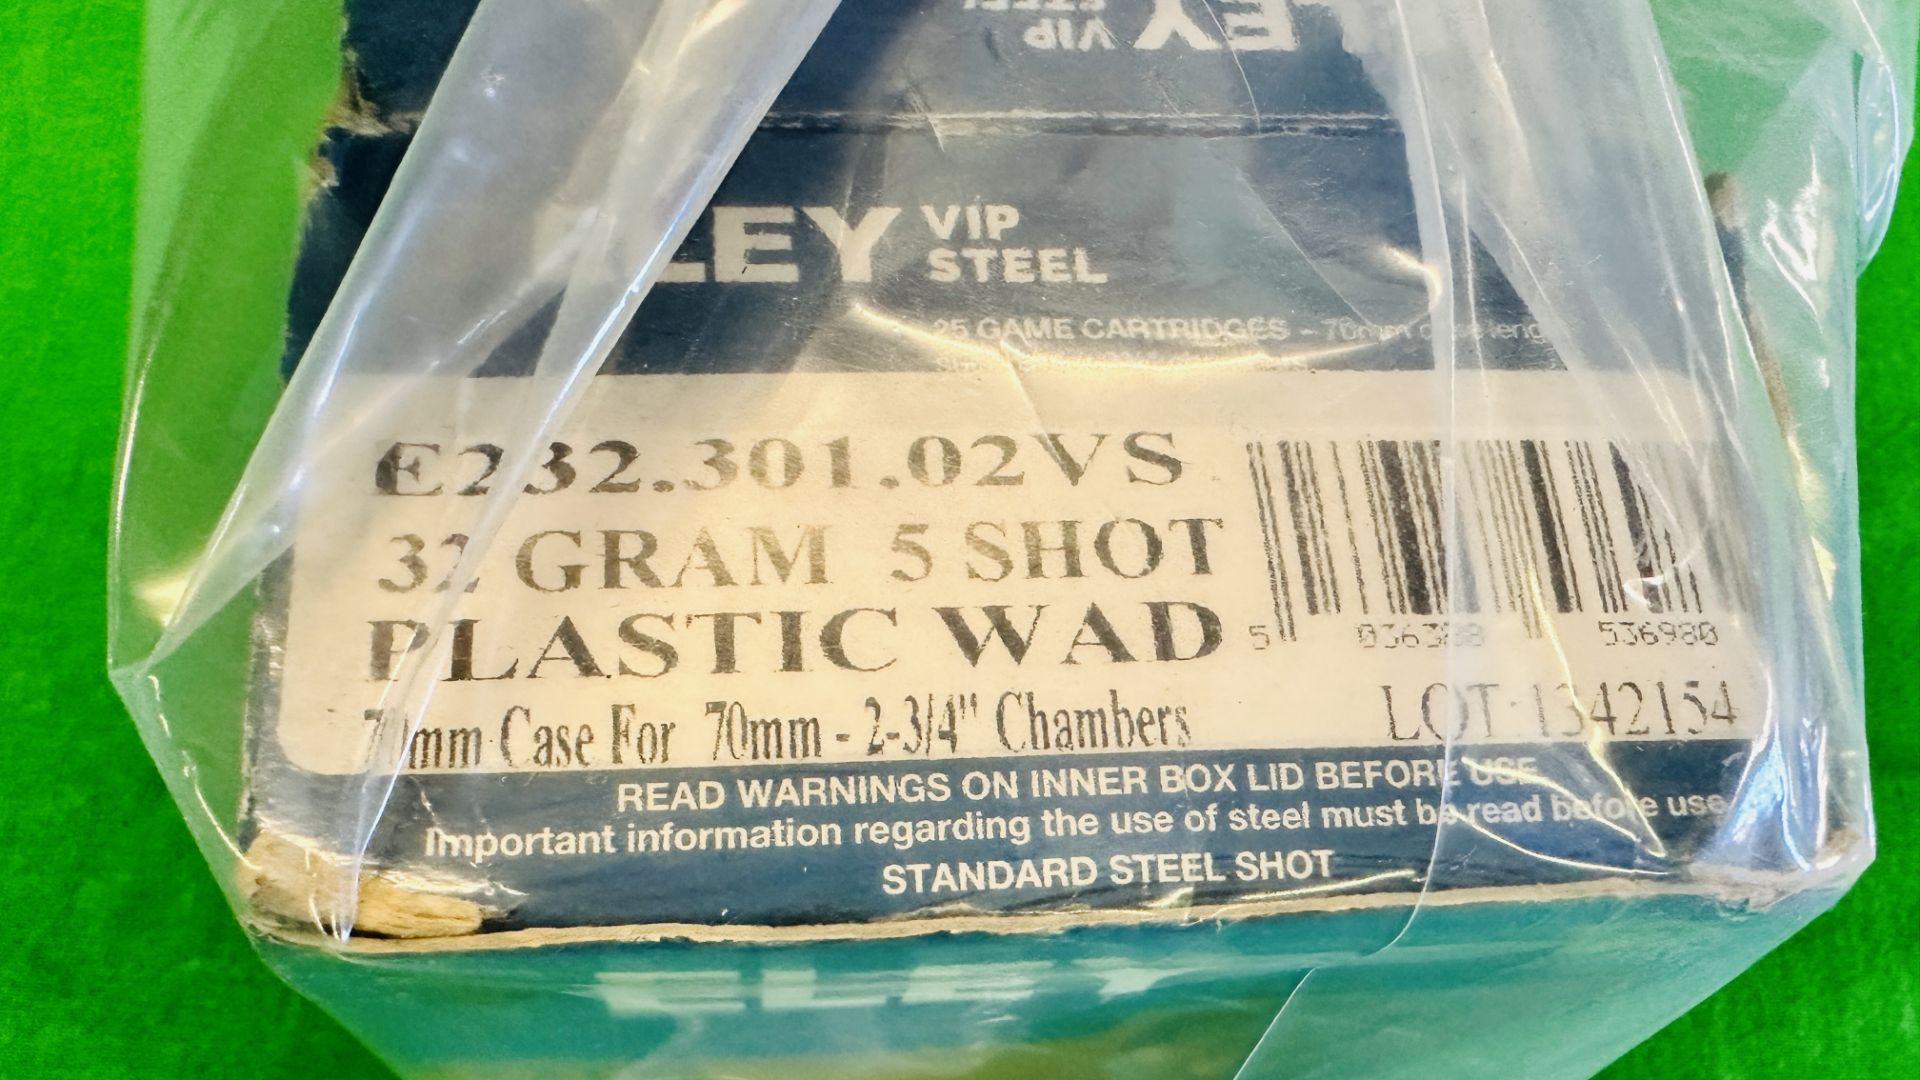 100 X ELEY 12 GAUGE VIP STEEL 32GRM 5 SHOT PLASTIC WAD CARTRIDGES - (TO BE COLLECTED IN PERSON BY - Image 3 of 4